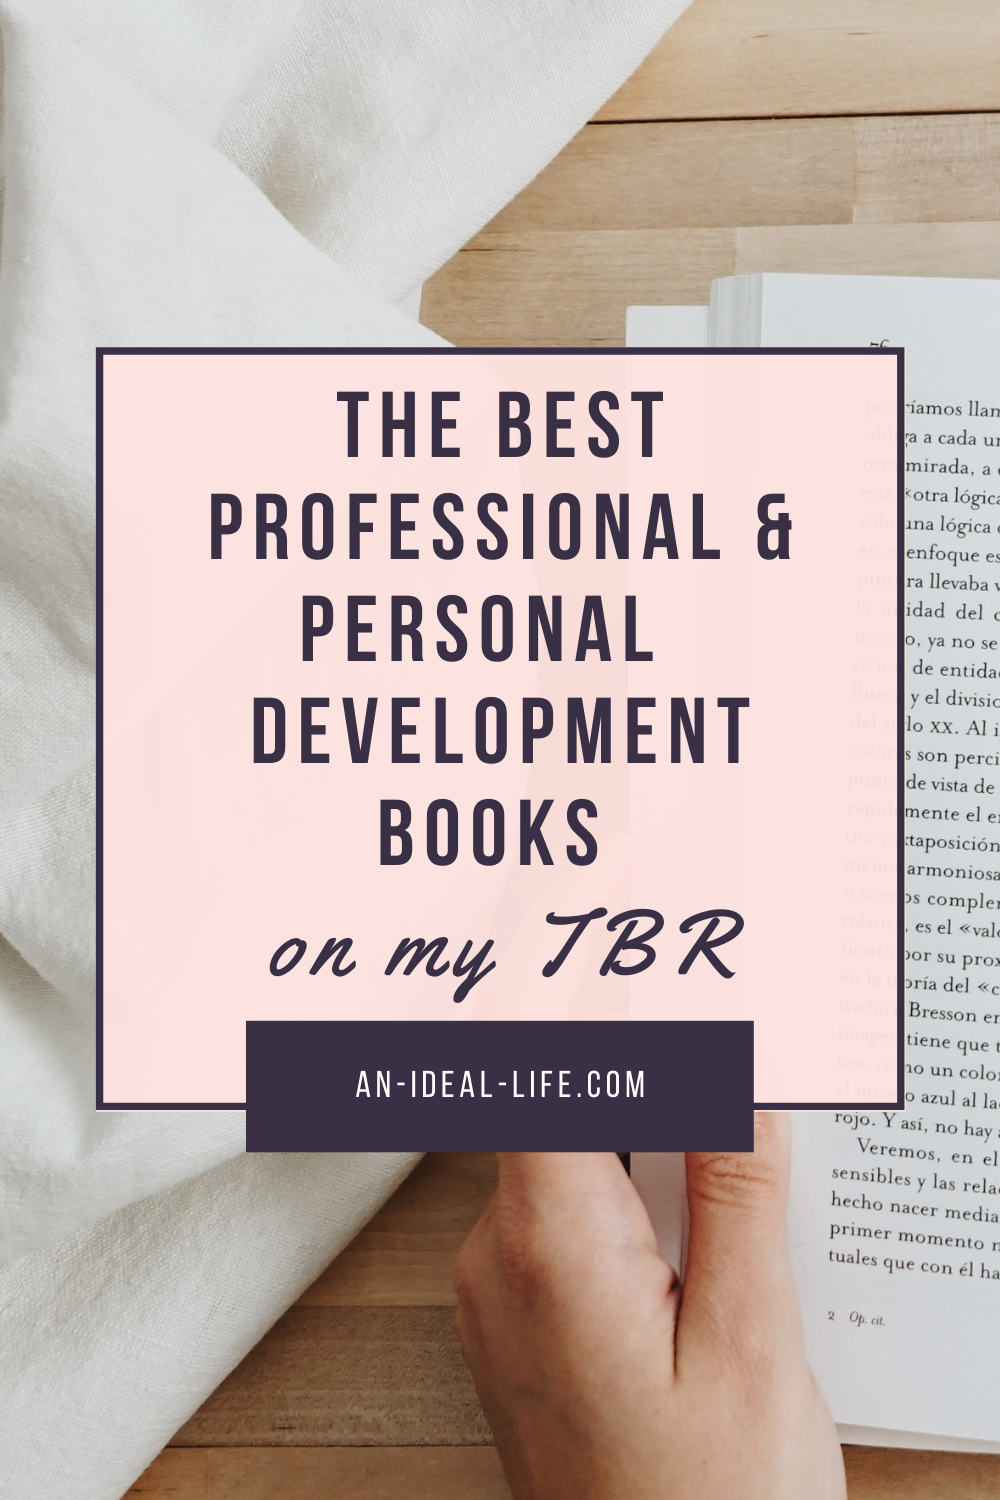 The Best Professional & Personal Development Books on my TBR